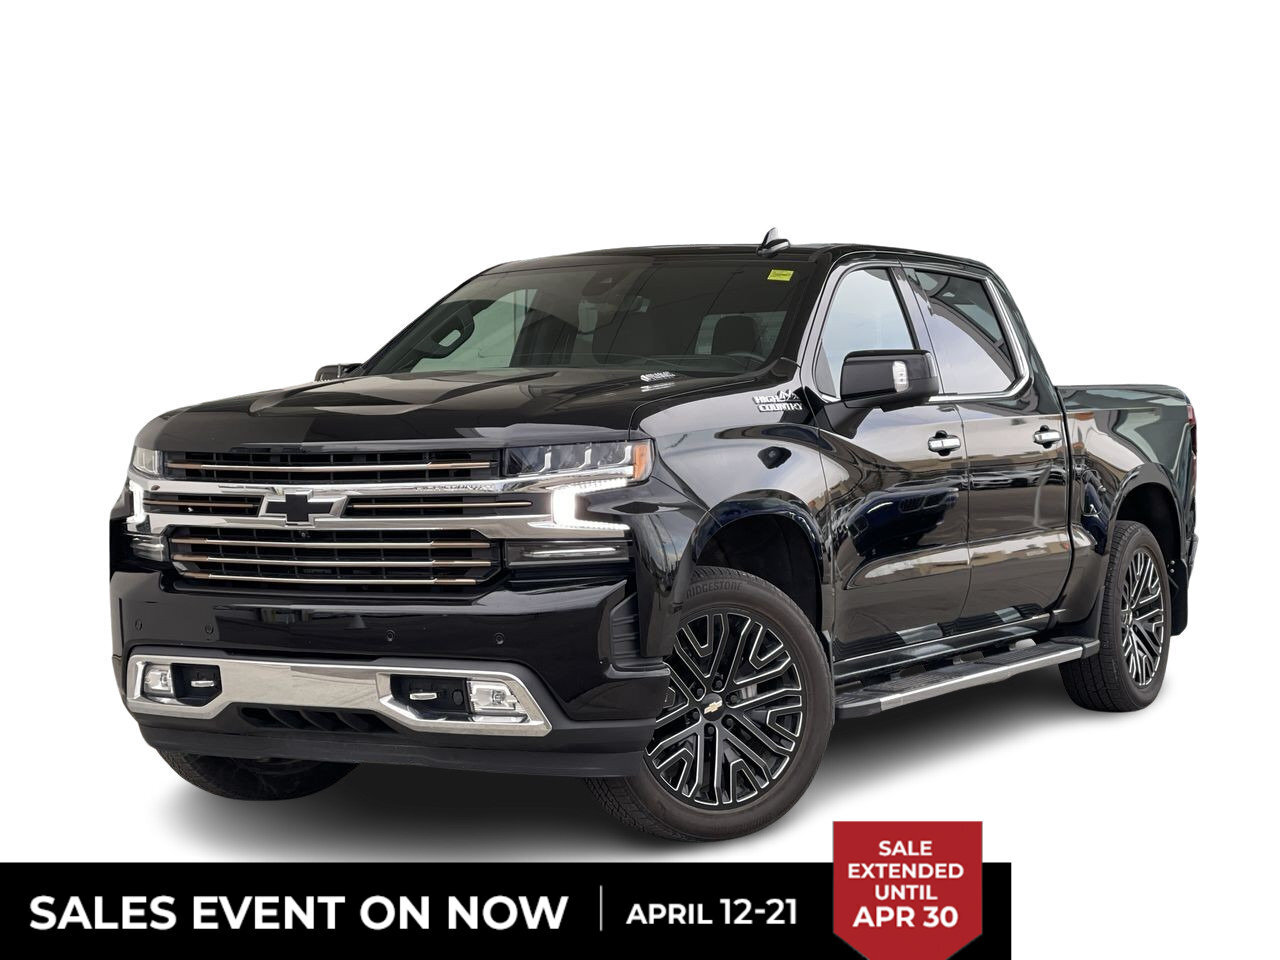 2021 Chevrolet Silverado 1500 High Country One owner / 